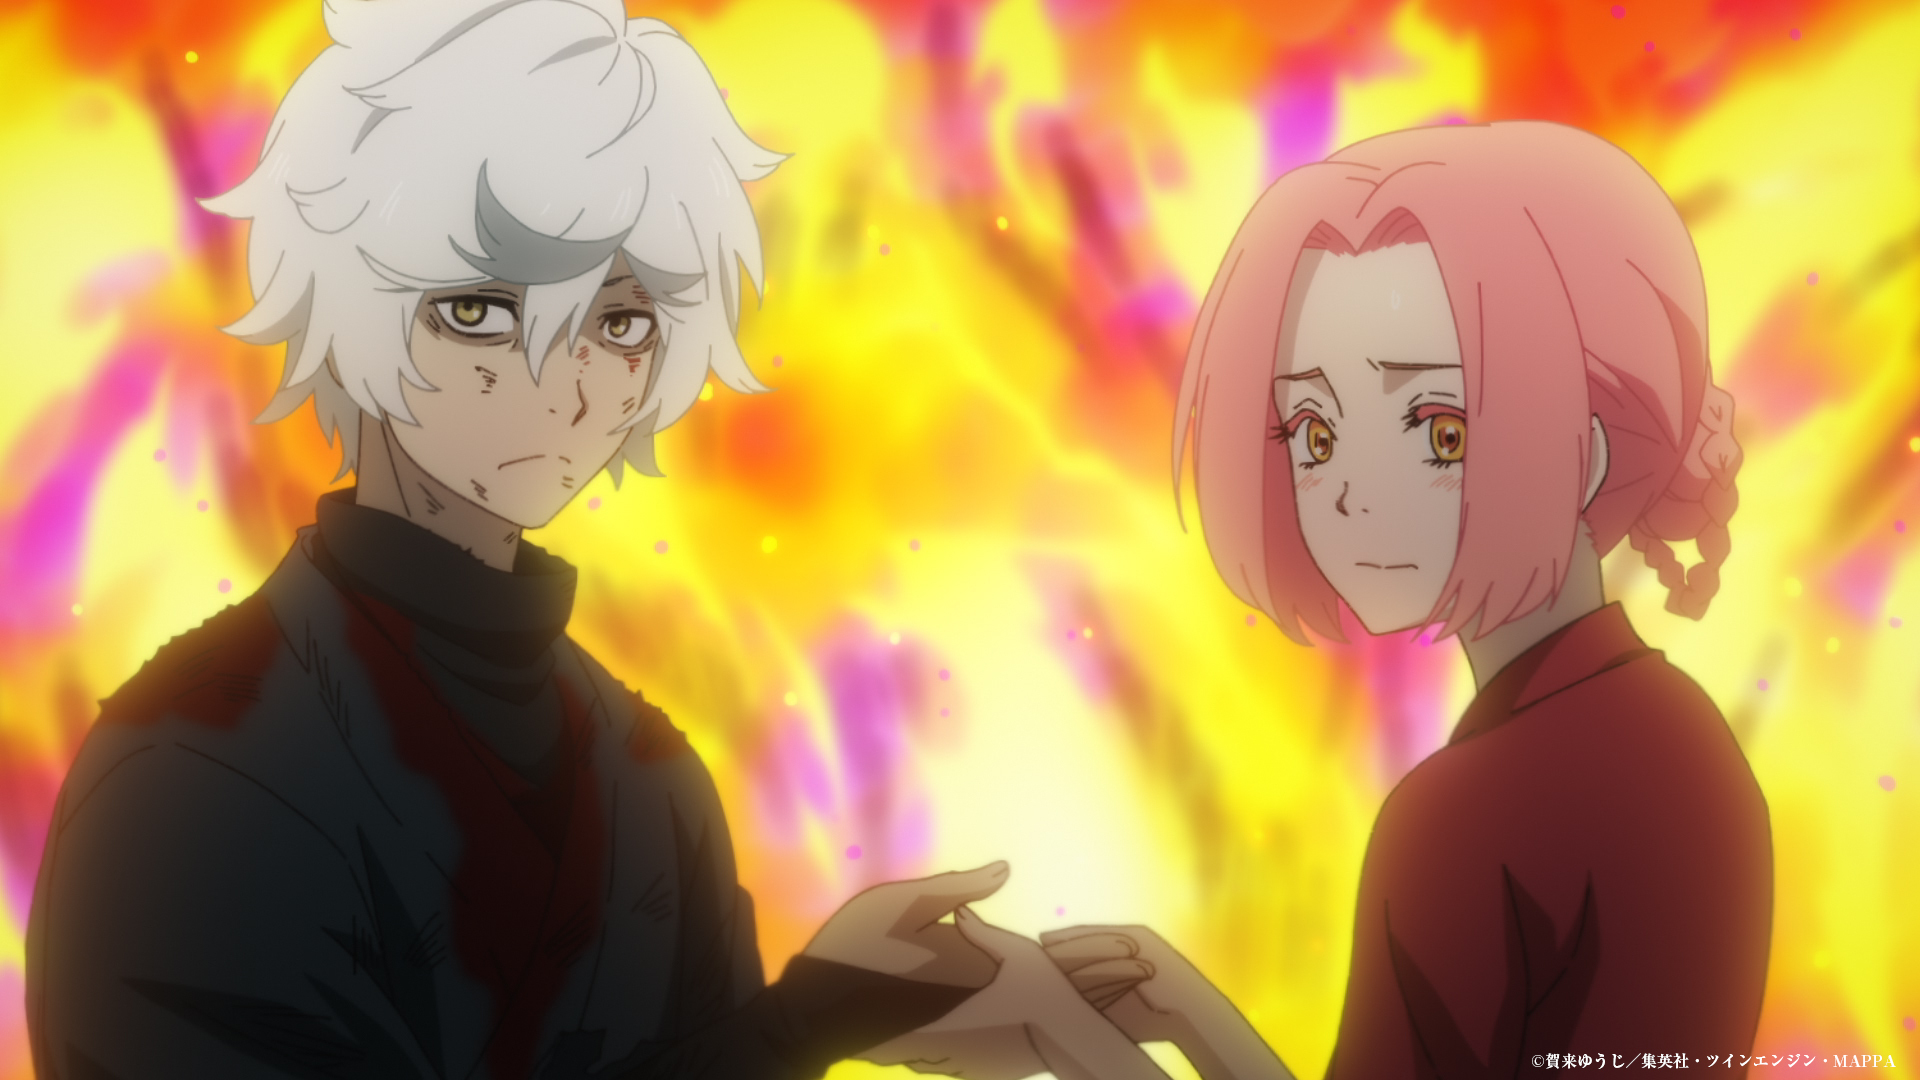 Hell's Paradise Episode 11 Preview Video Revealed - Anime Corner